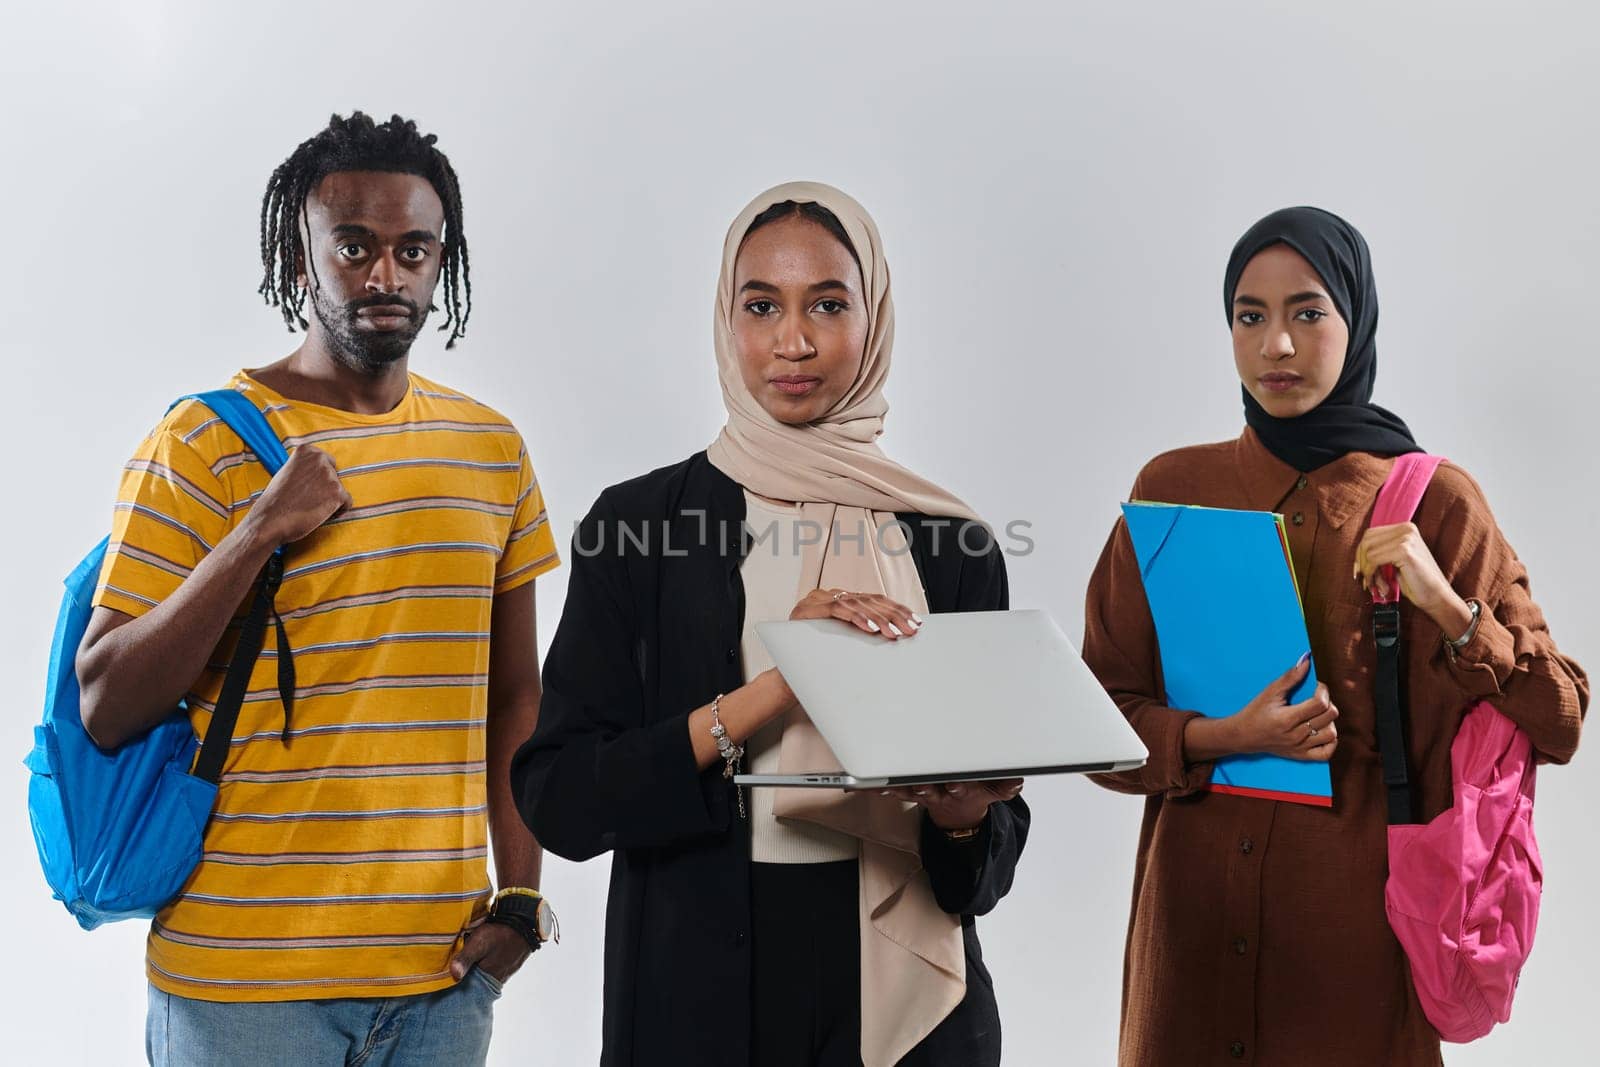 A group of students, including an African American student and two hijab-wearing women, stand united against a pristine white background, symbolizing a harmonious blend of cultures and backgrounds in the pursuit of knowledge and academic excellence by dotshock